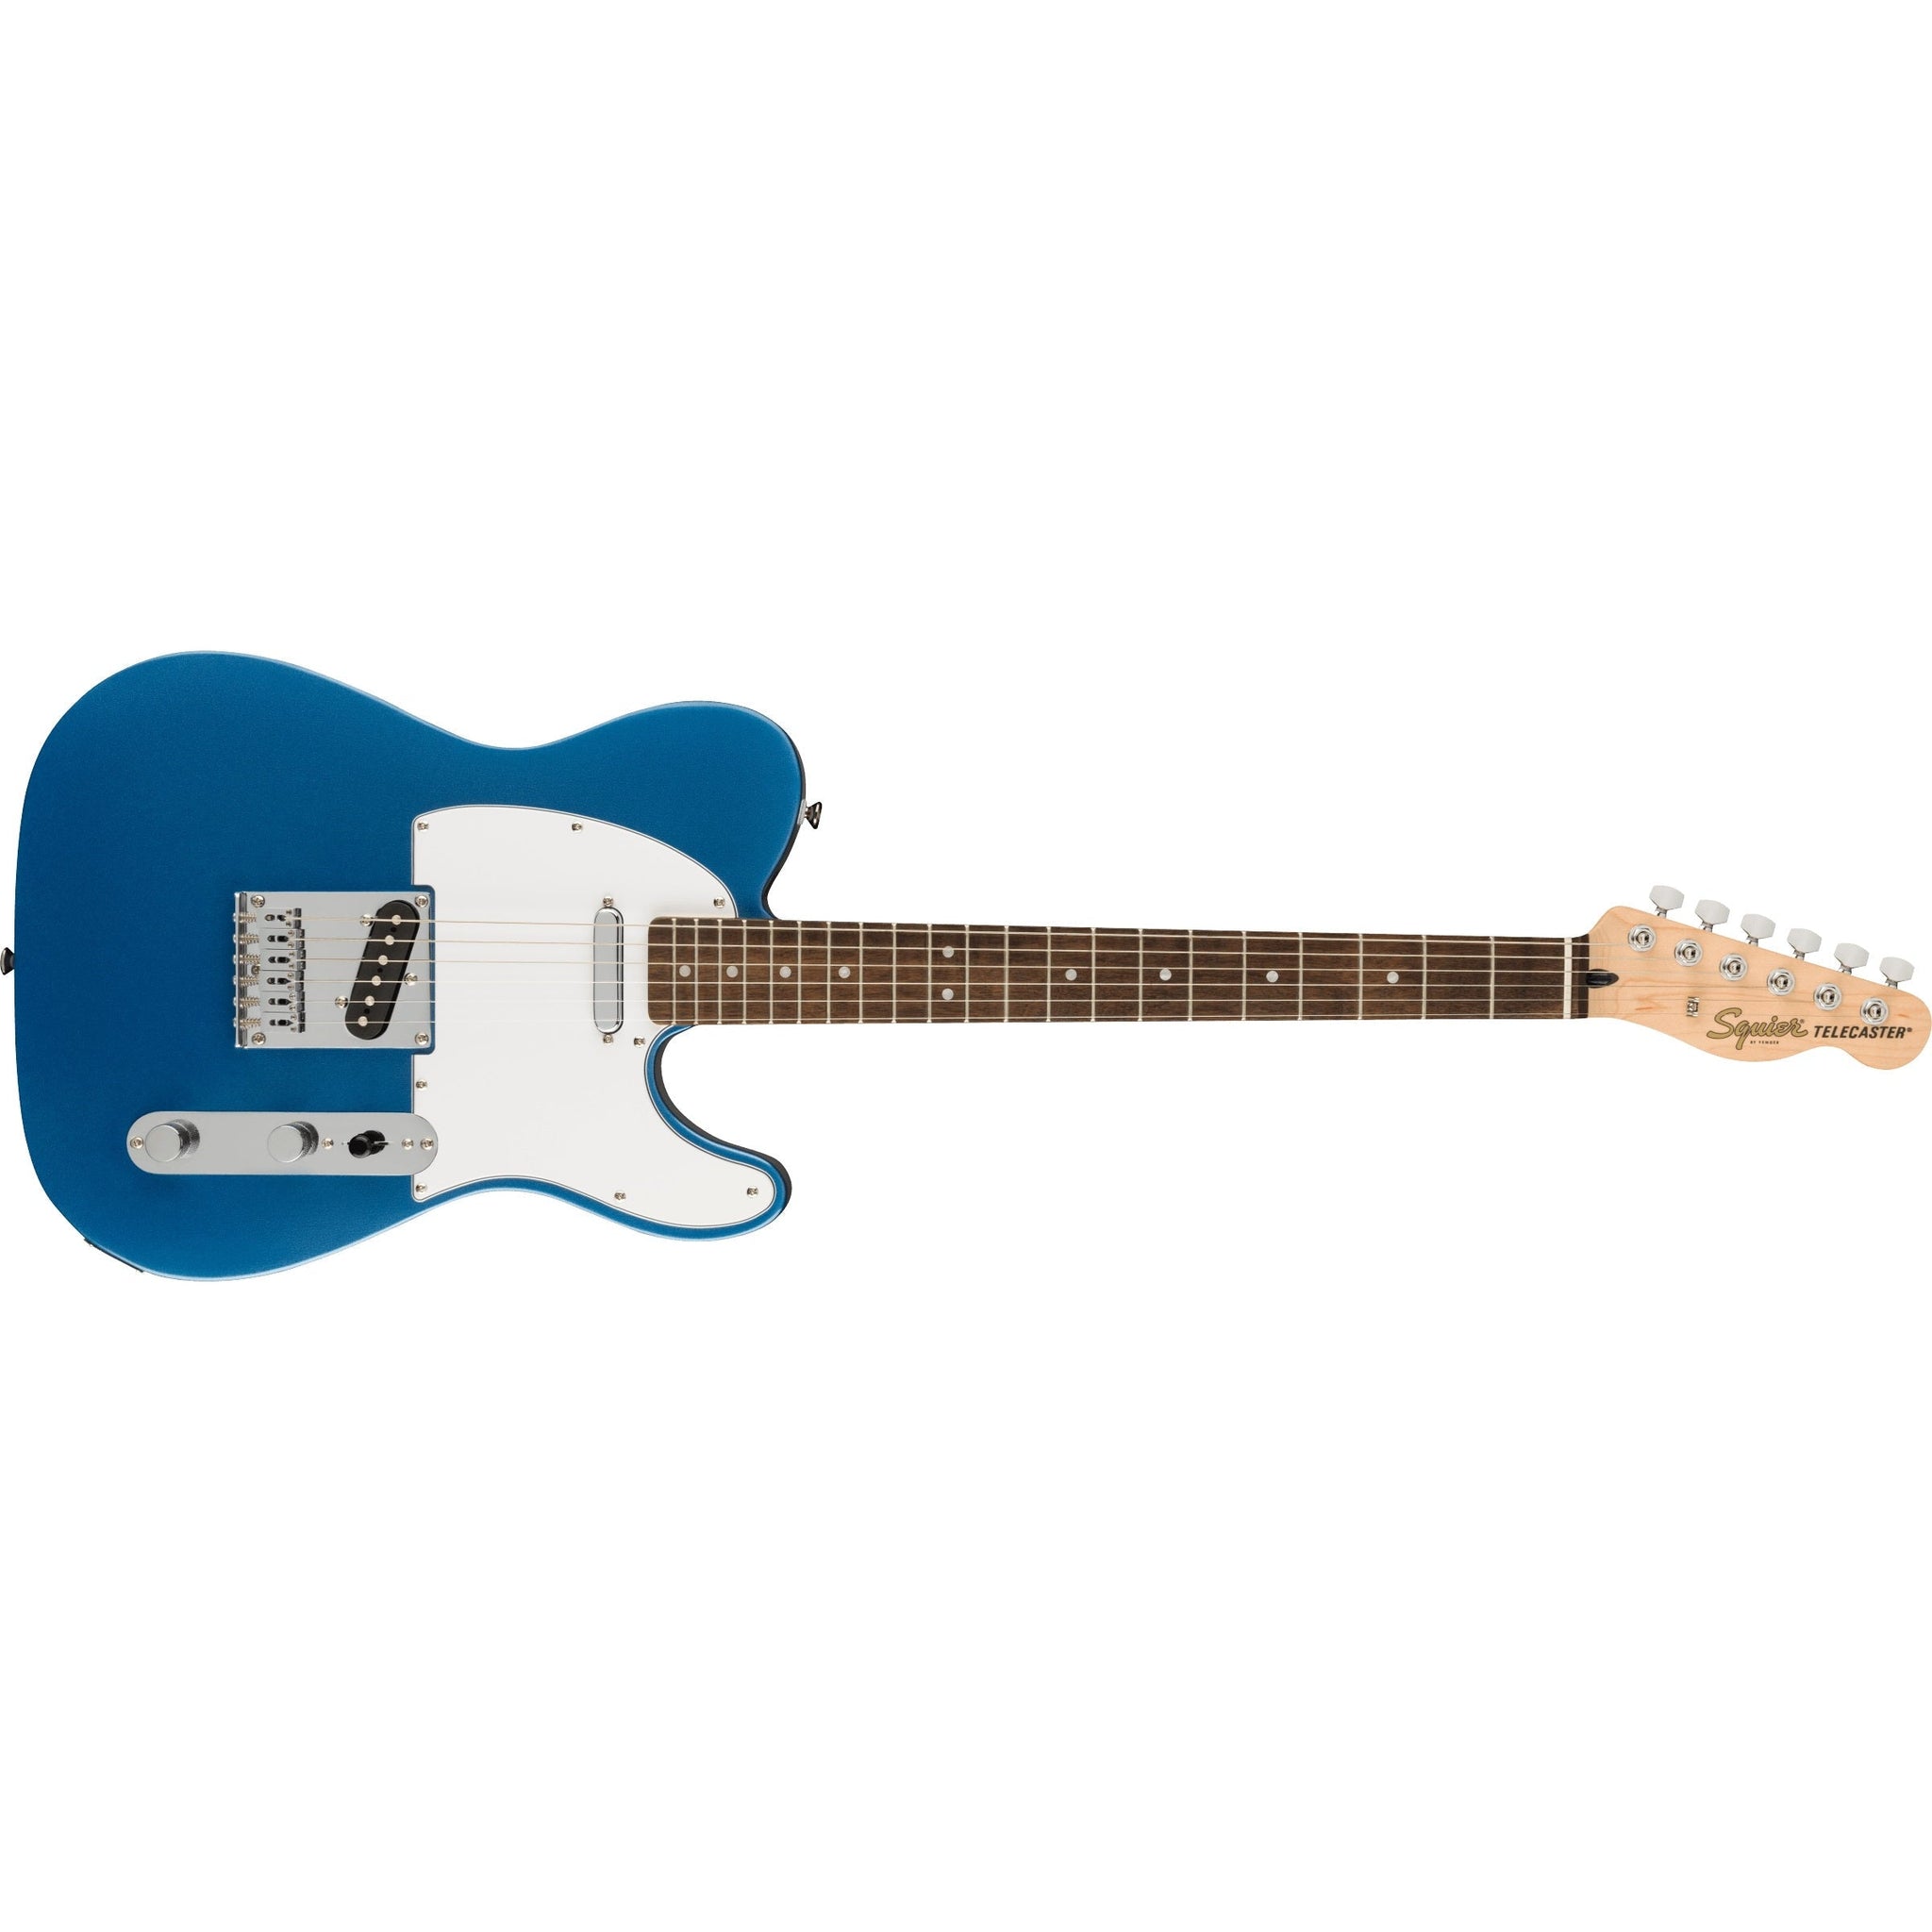 Fender Squier Affinity Series Telecaster Electric Guitar-Lake Placid Blue-Music World Academy